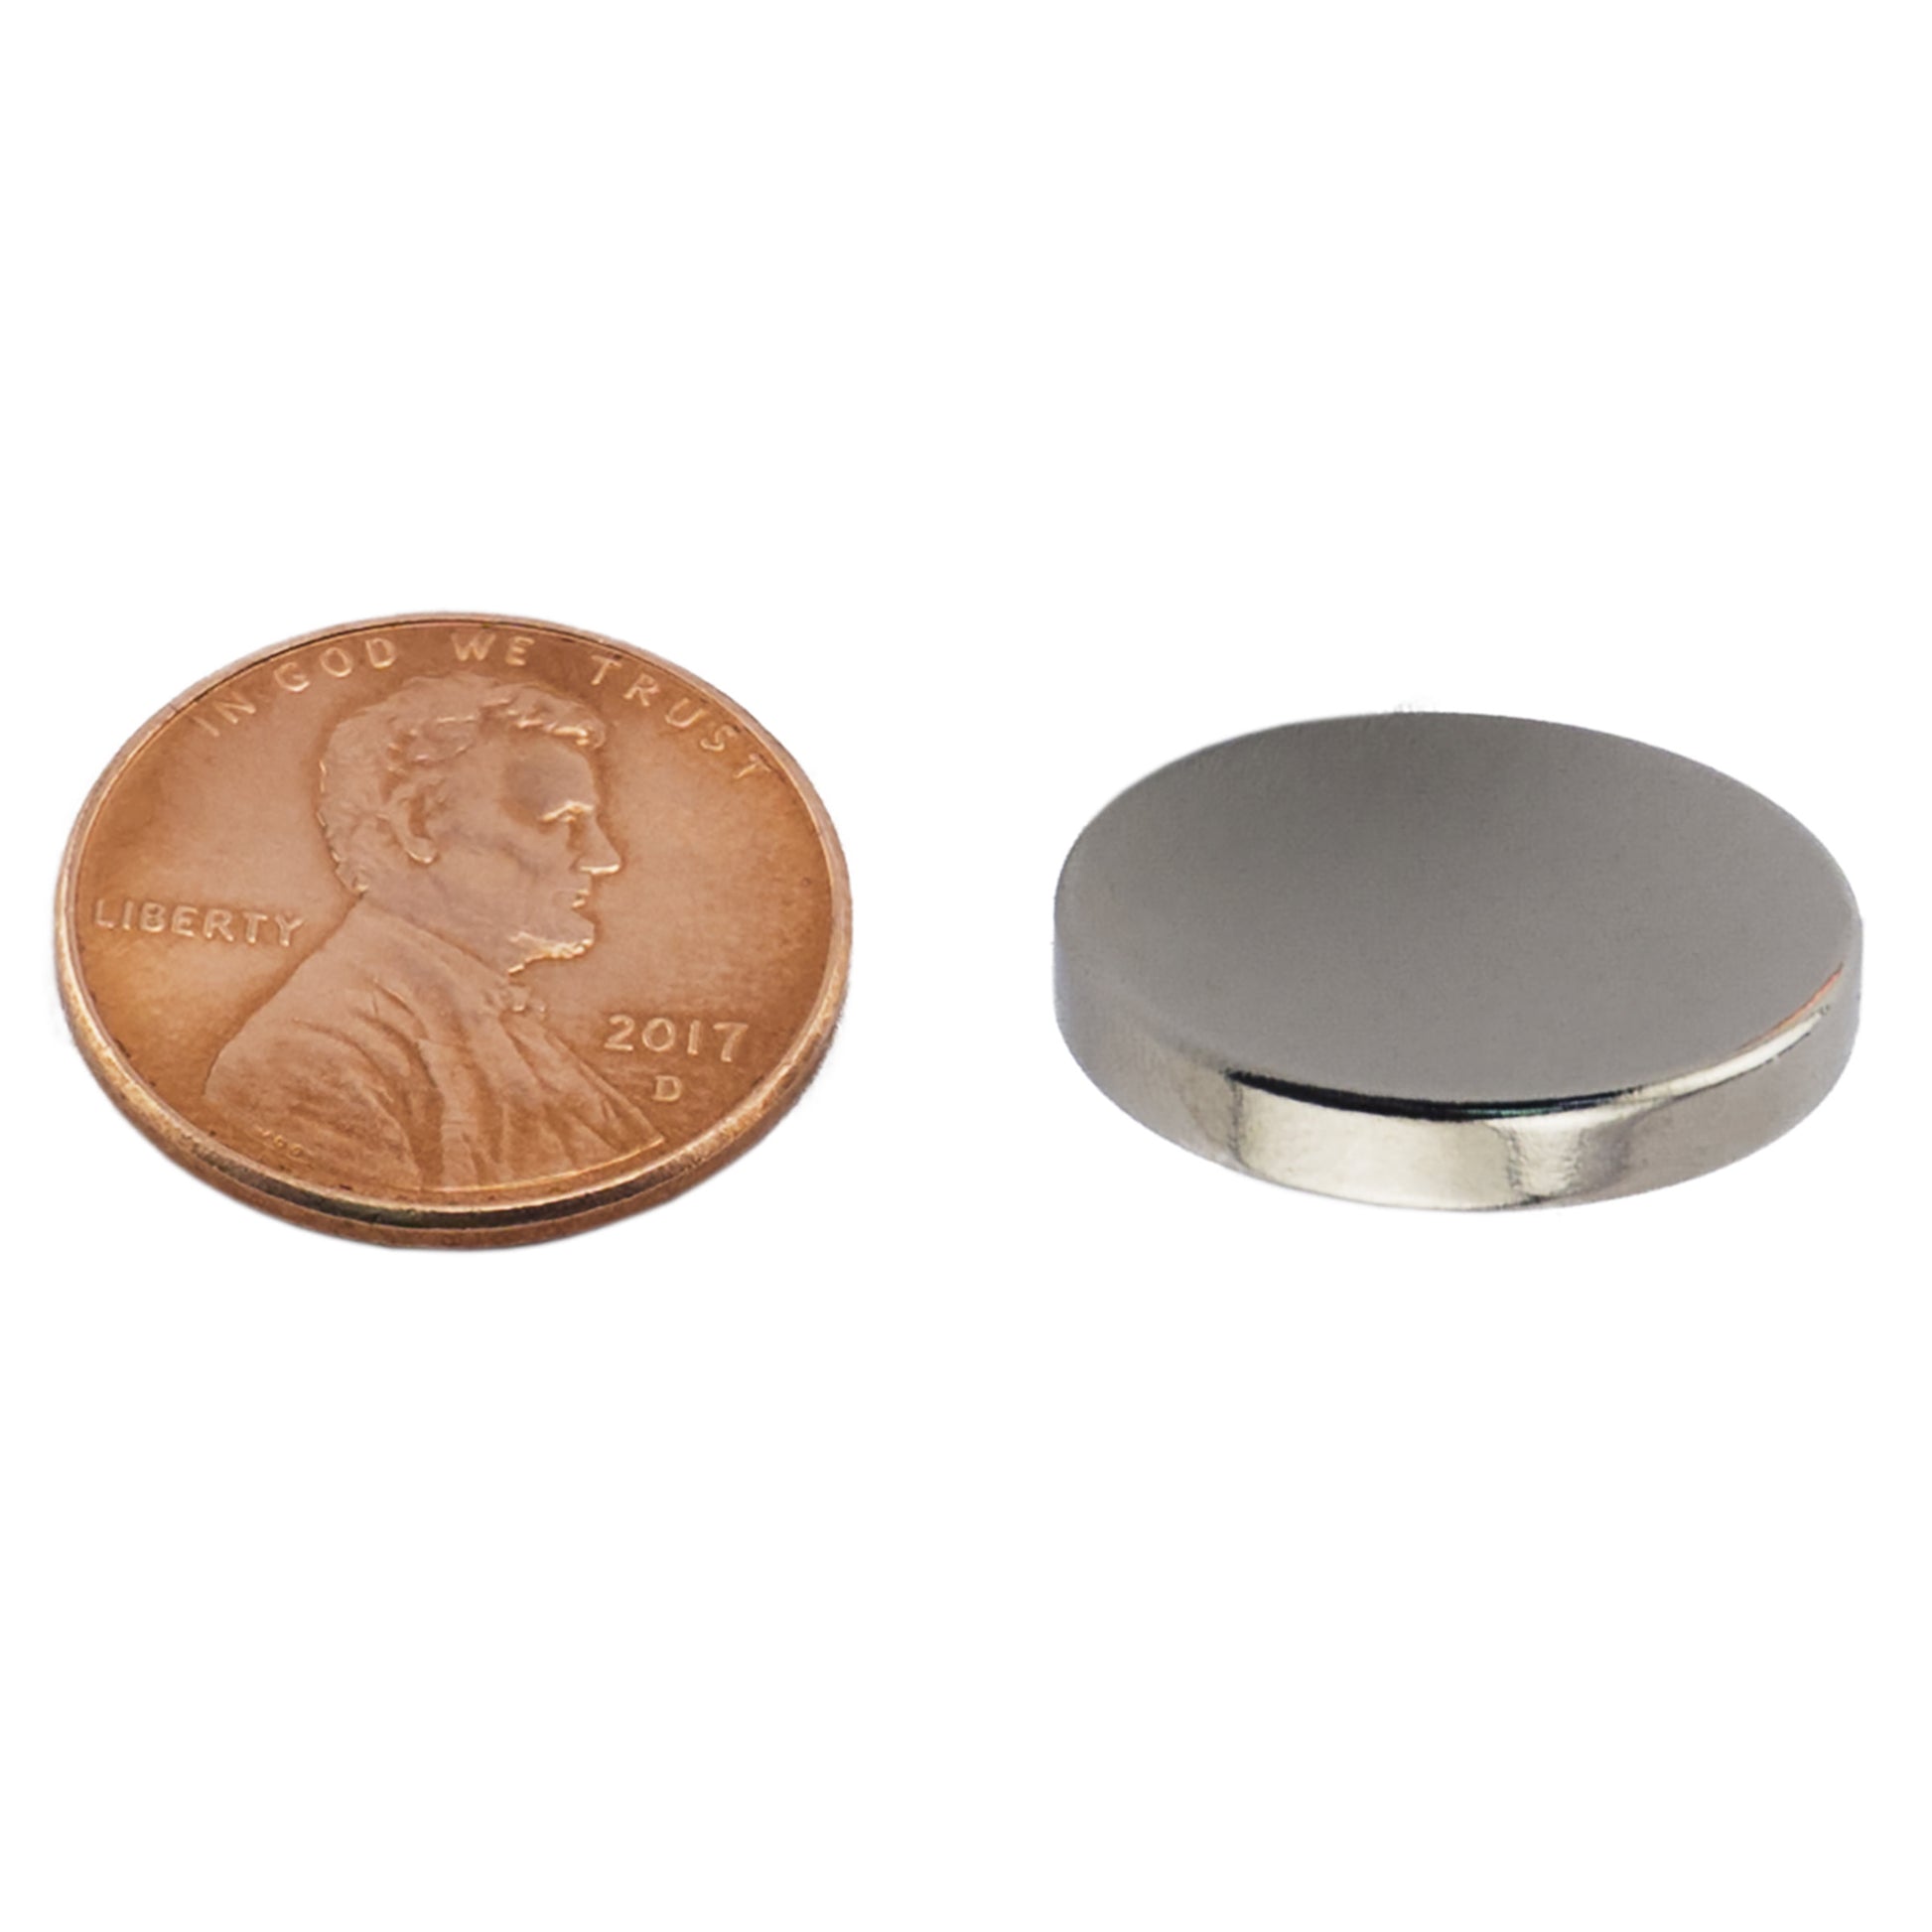 Load image into Gallery viewer, ND008713N Neodymium Disc Magnet - Compared to Penny for Size Reference